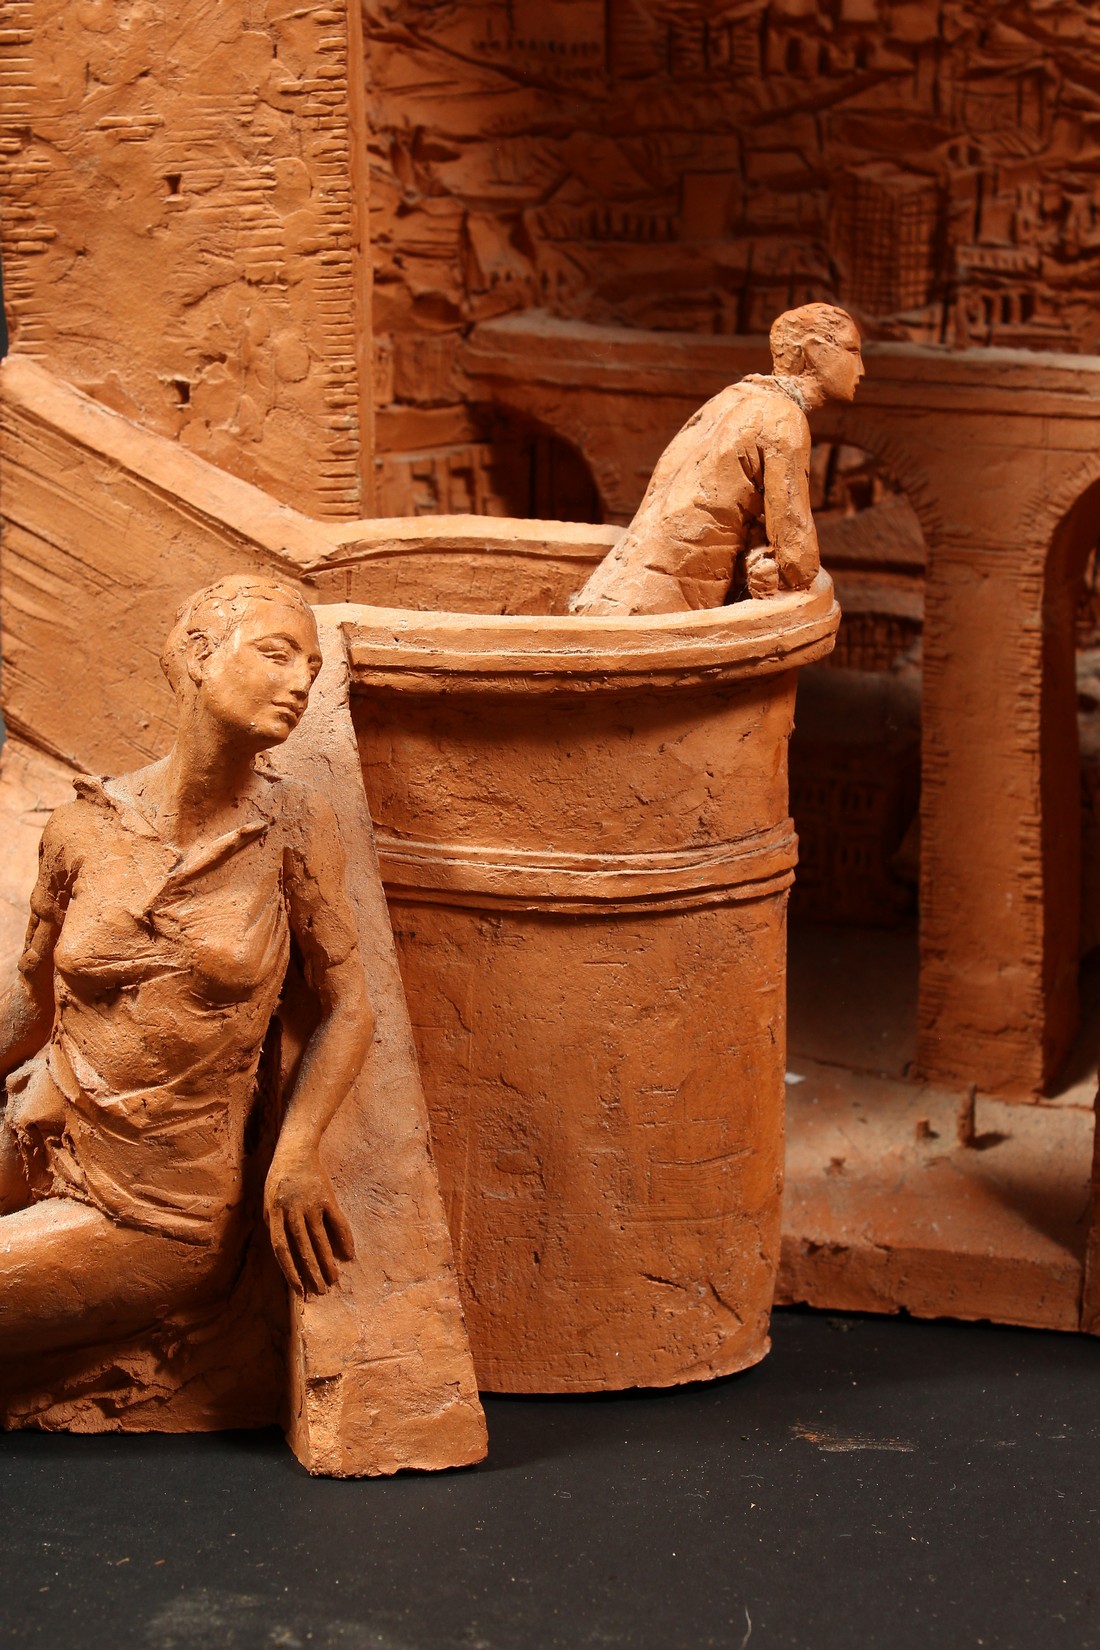 Paul Day (b. 1967) British, figures on a balcony overlooking a classical city, terracotta sculpture, - Image 2 of 8